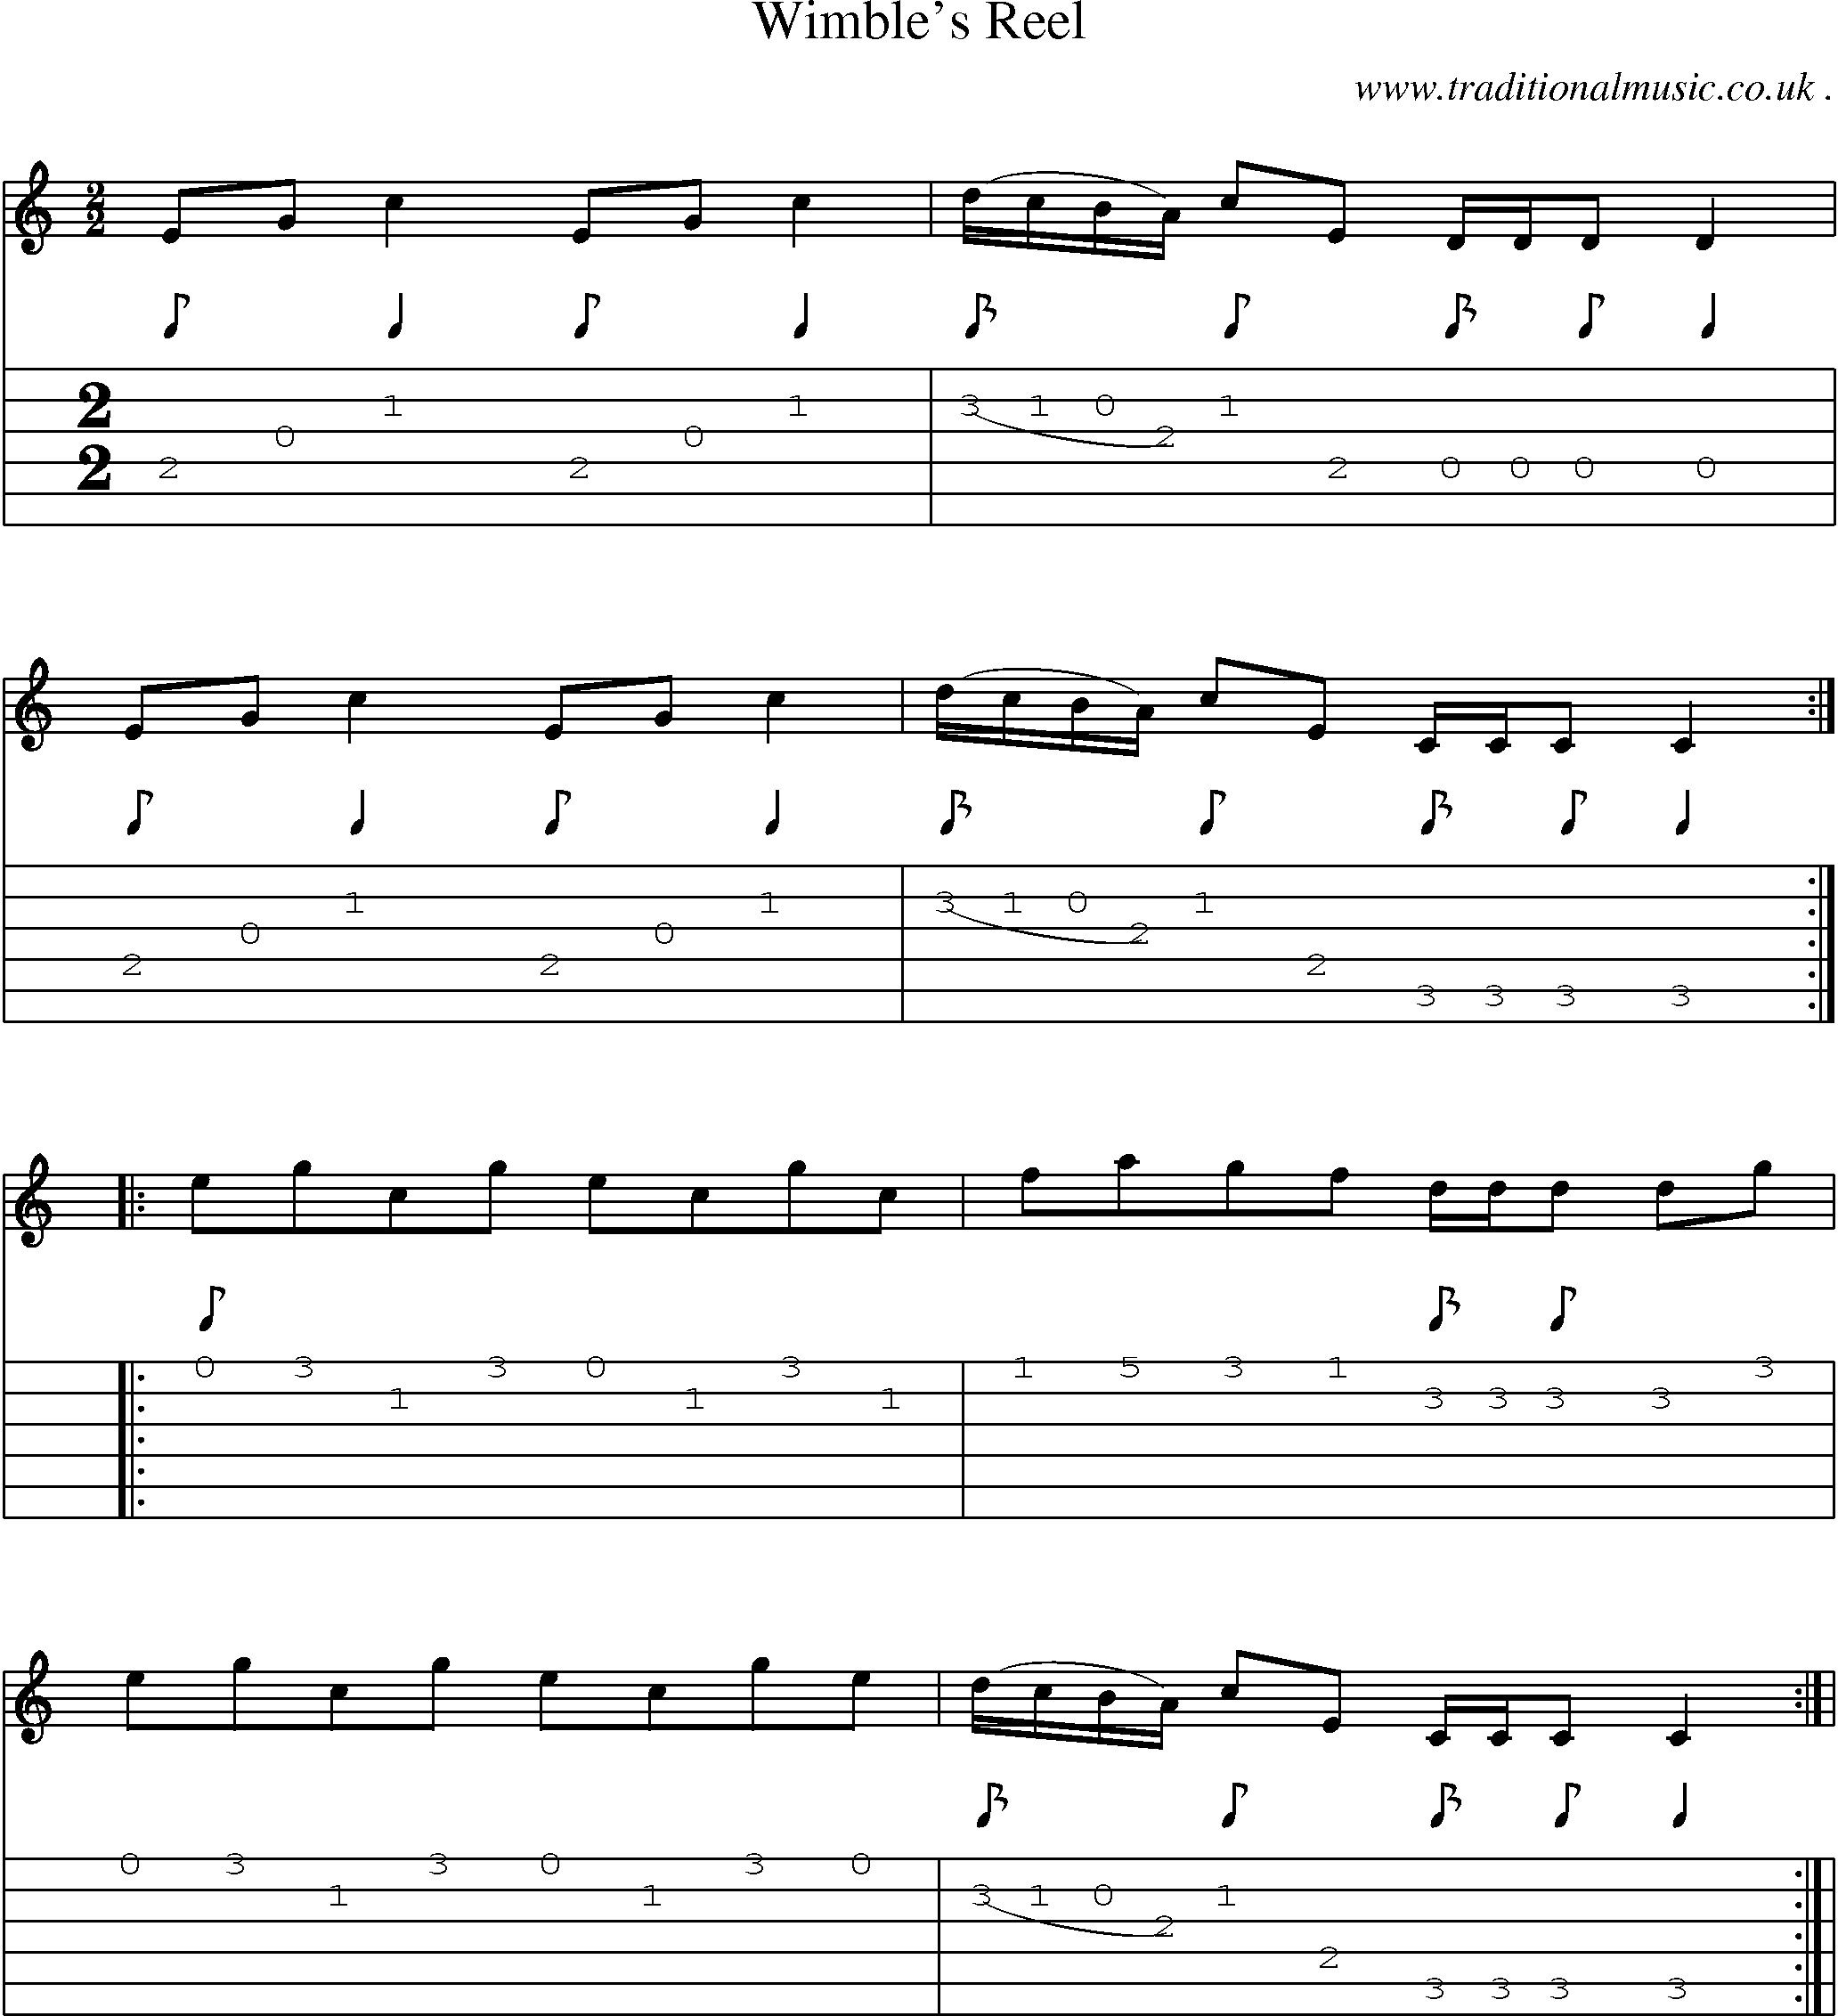 Sheet-Music and Guitar Tabs for Wimbles Reel